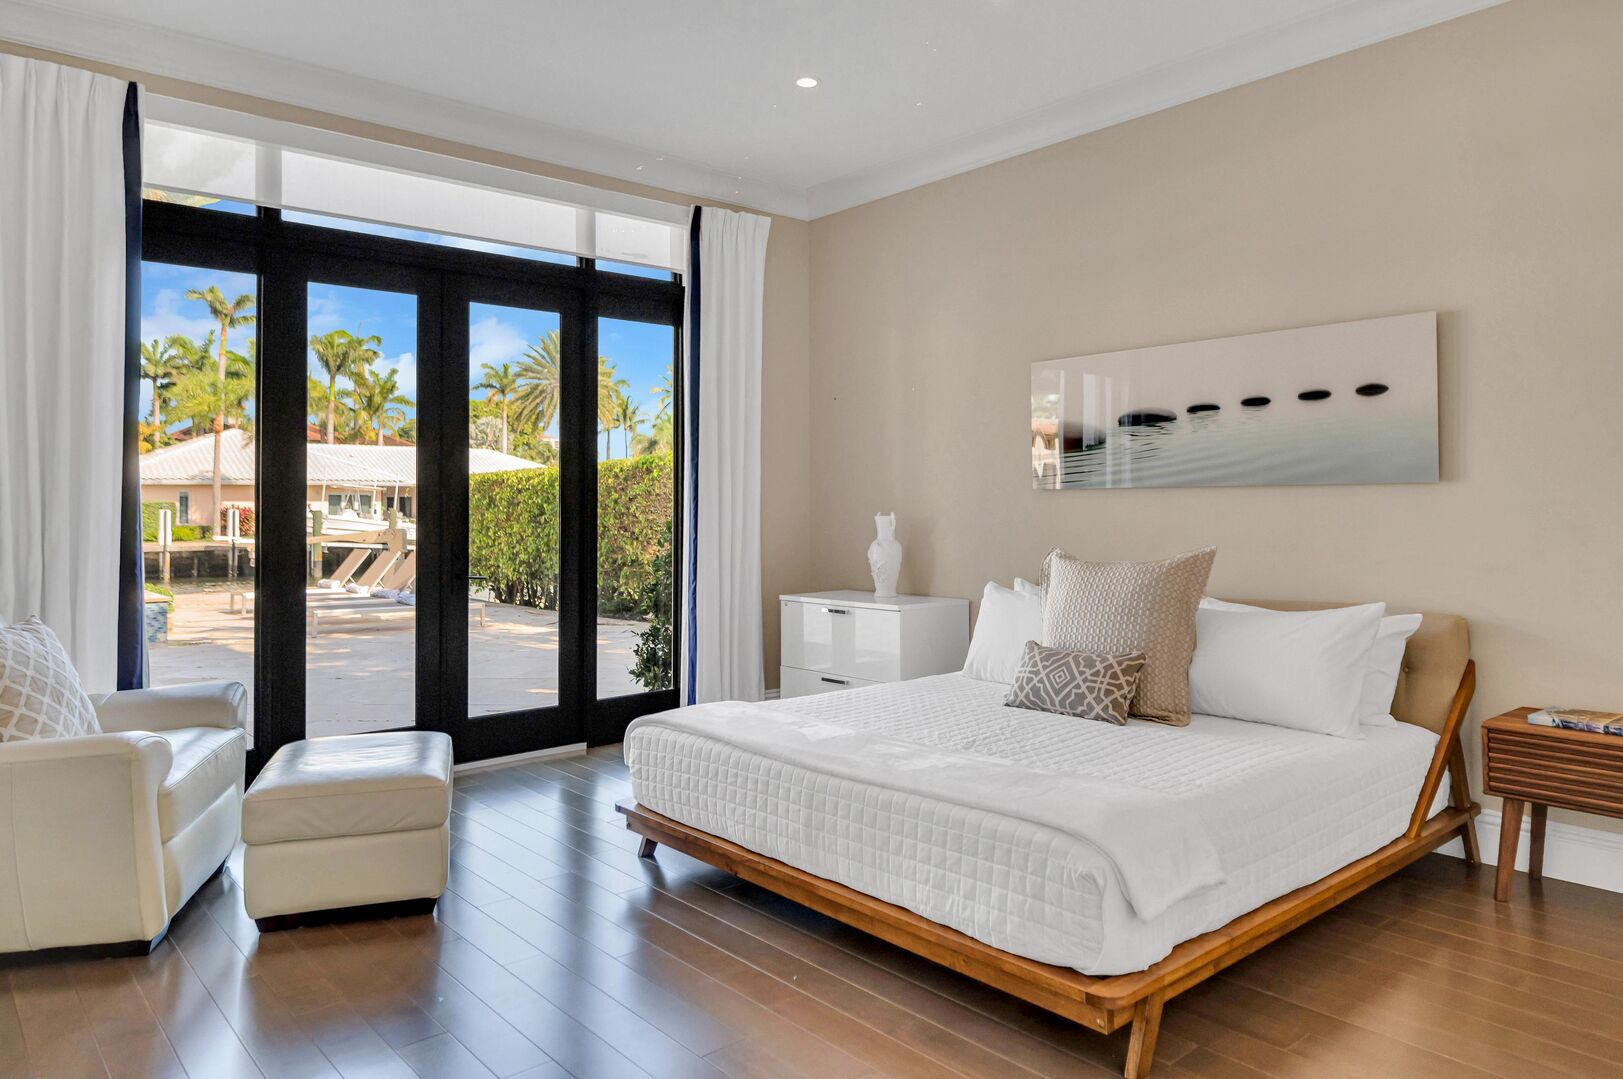 Bedroom six located on the ground flour boasts a king size bed, smart TV and patio access with its heated pool.